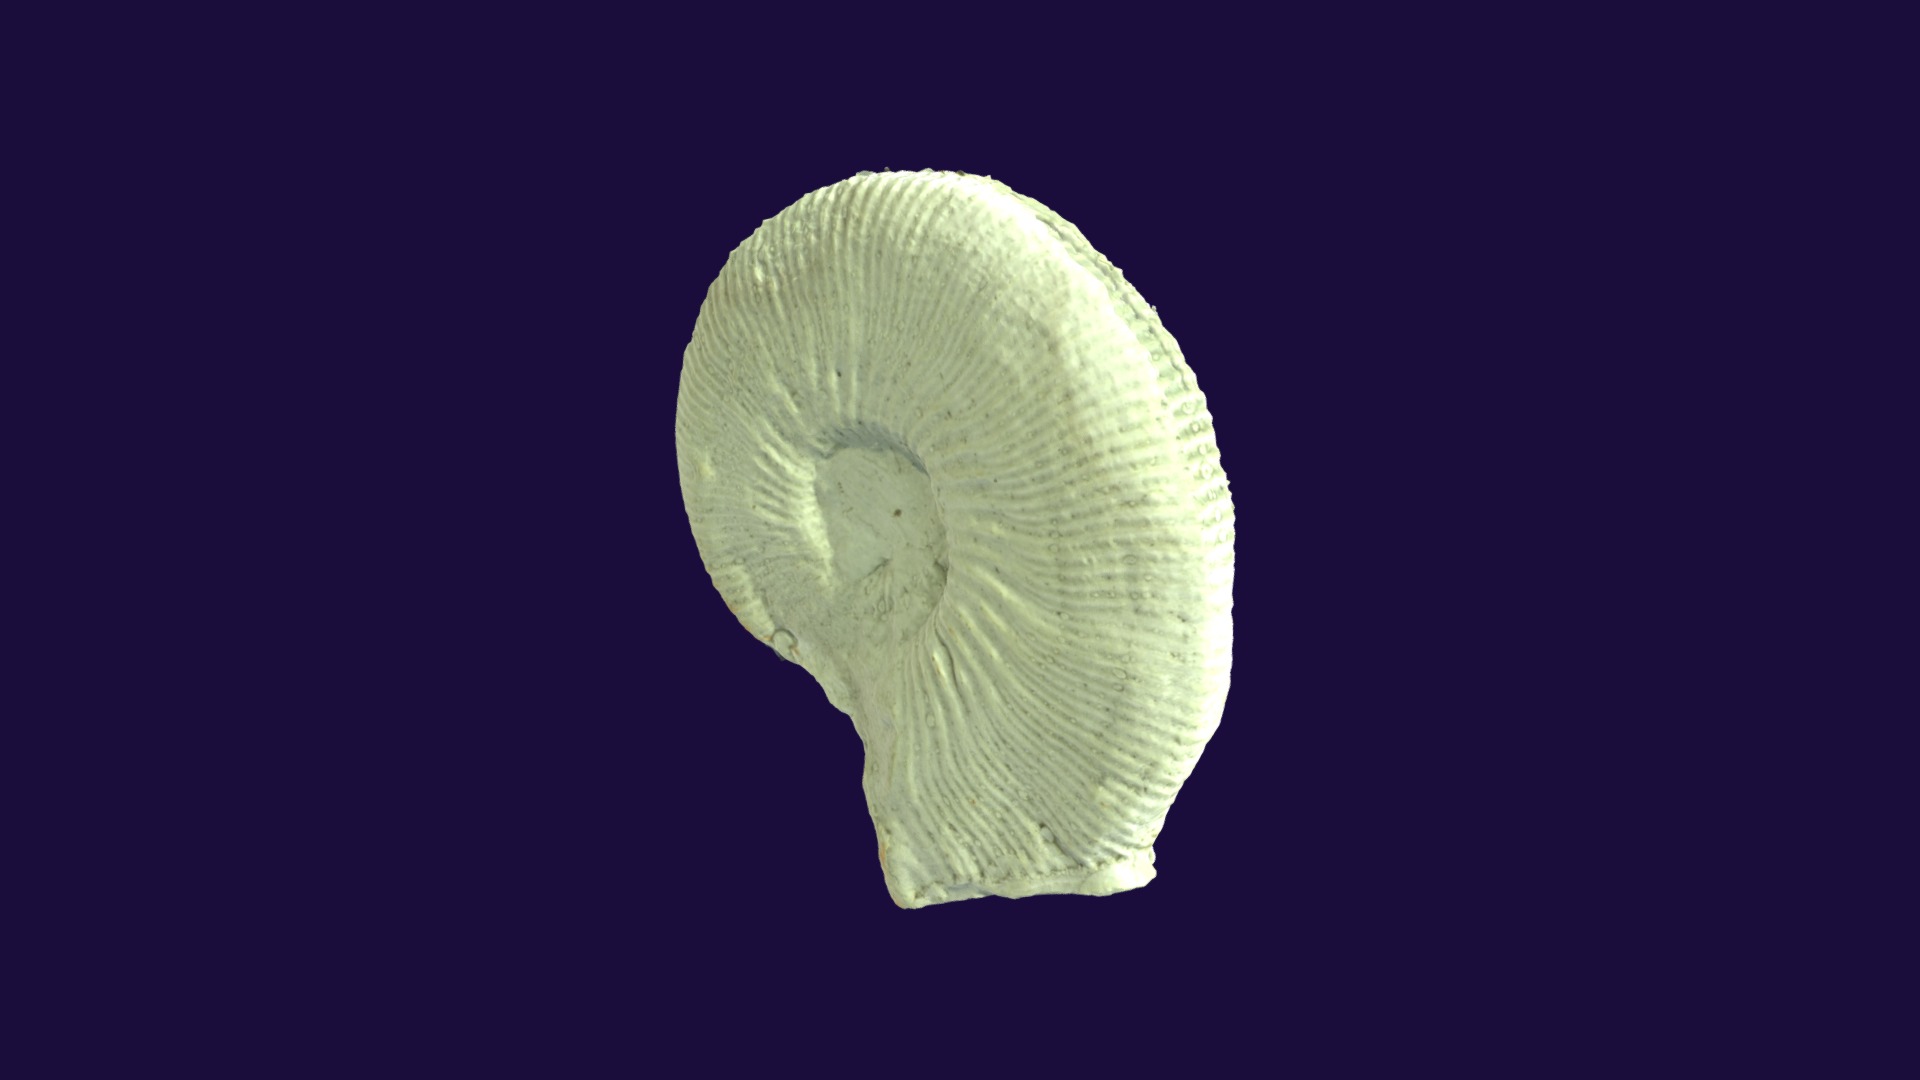 3D model Cosmoceras knechteli 104152 - This is a 3D model of the Cosmoceras knechteli 104152. The 3D model is about a white shell with a black background.